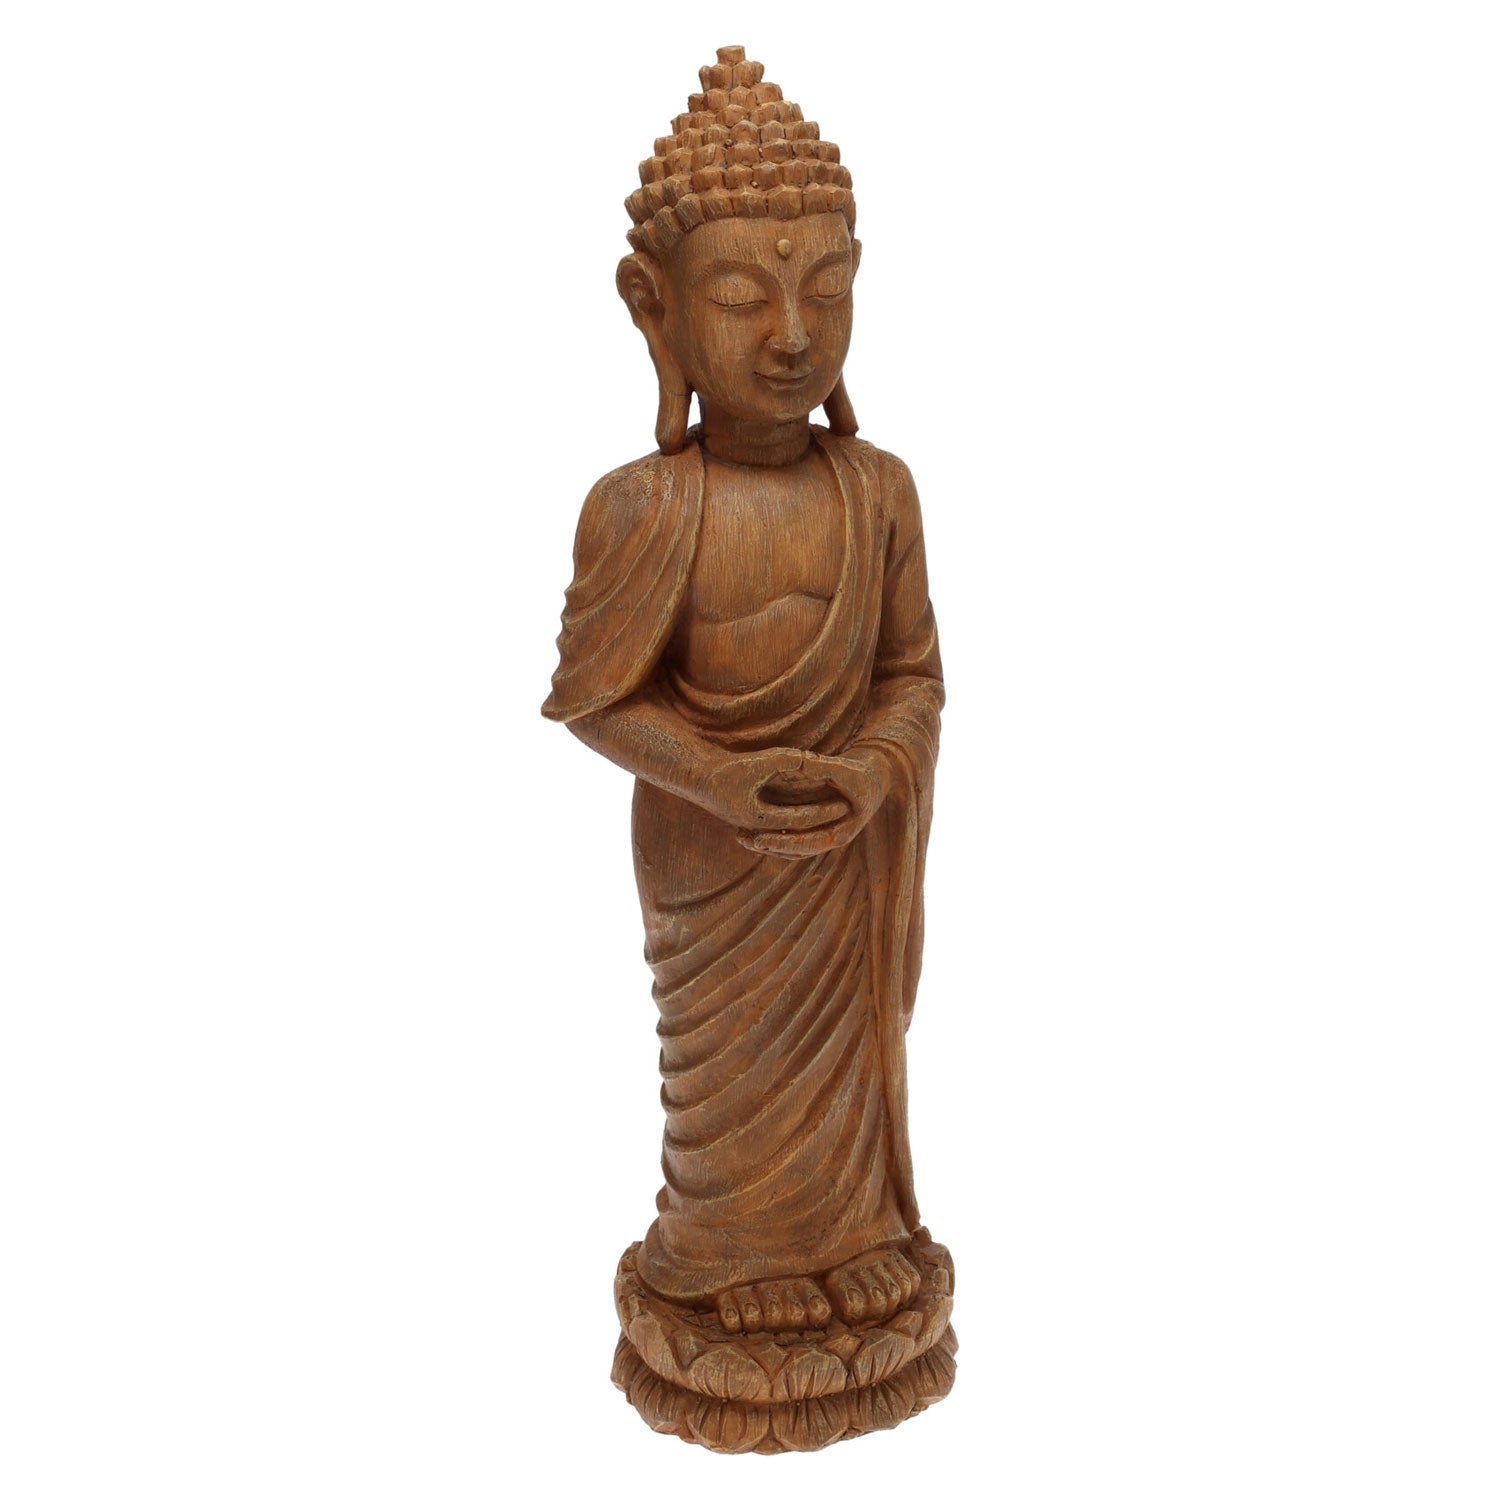 The Home Buddha Standing Polystone 1 Shaws Department Stores